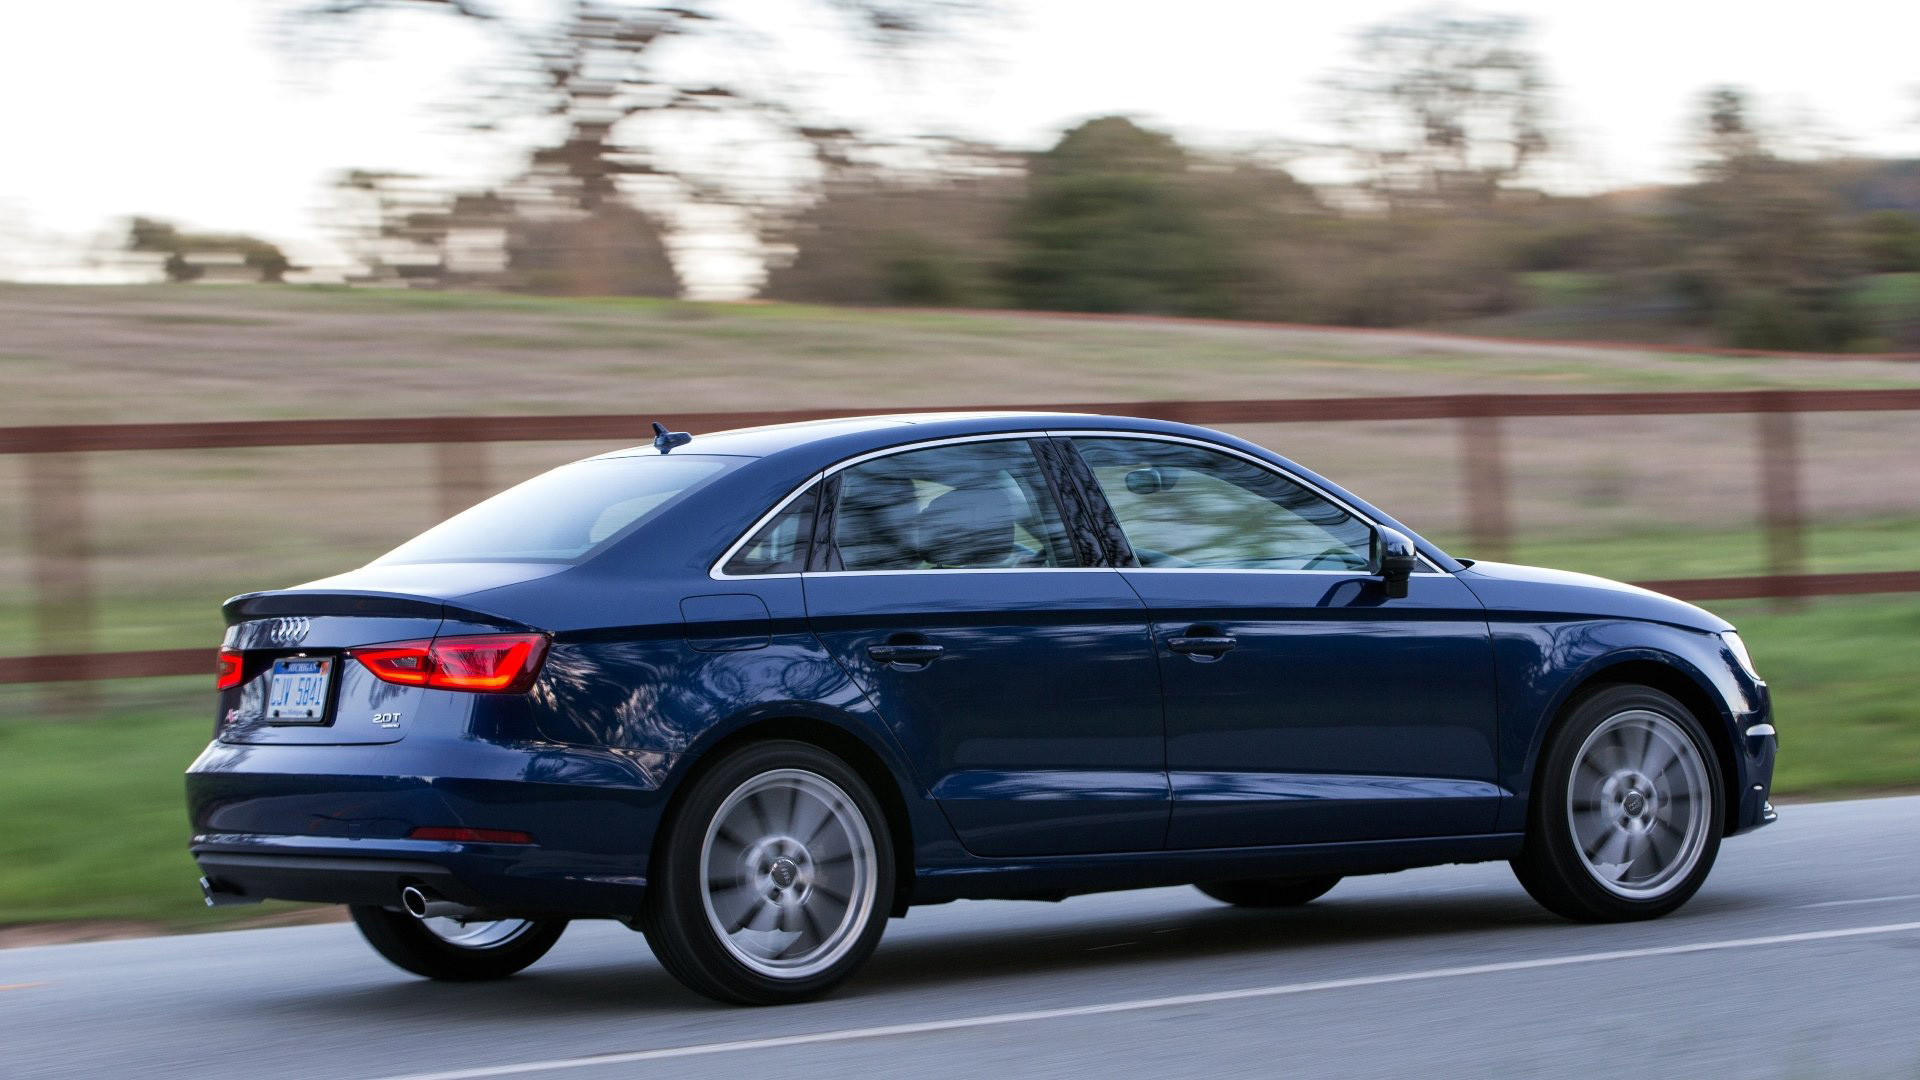 The S3 goes beyond the "standard" to deliver excellence.